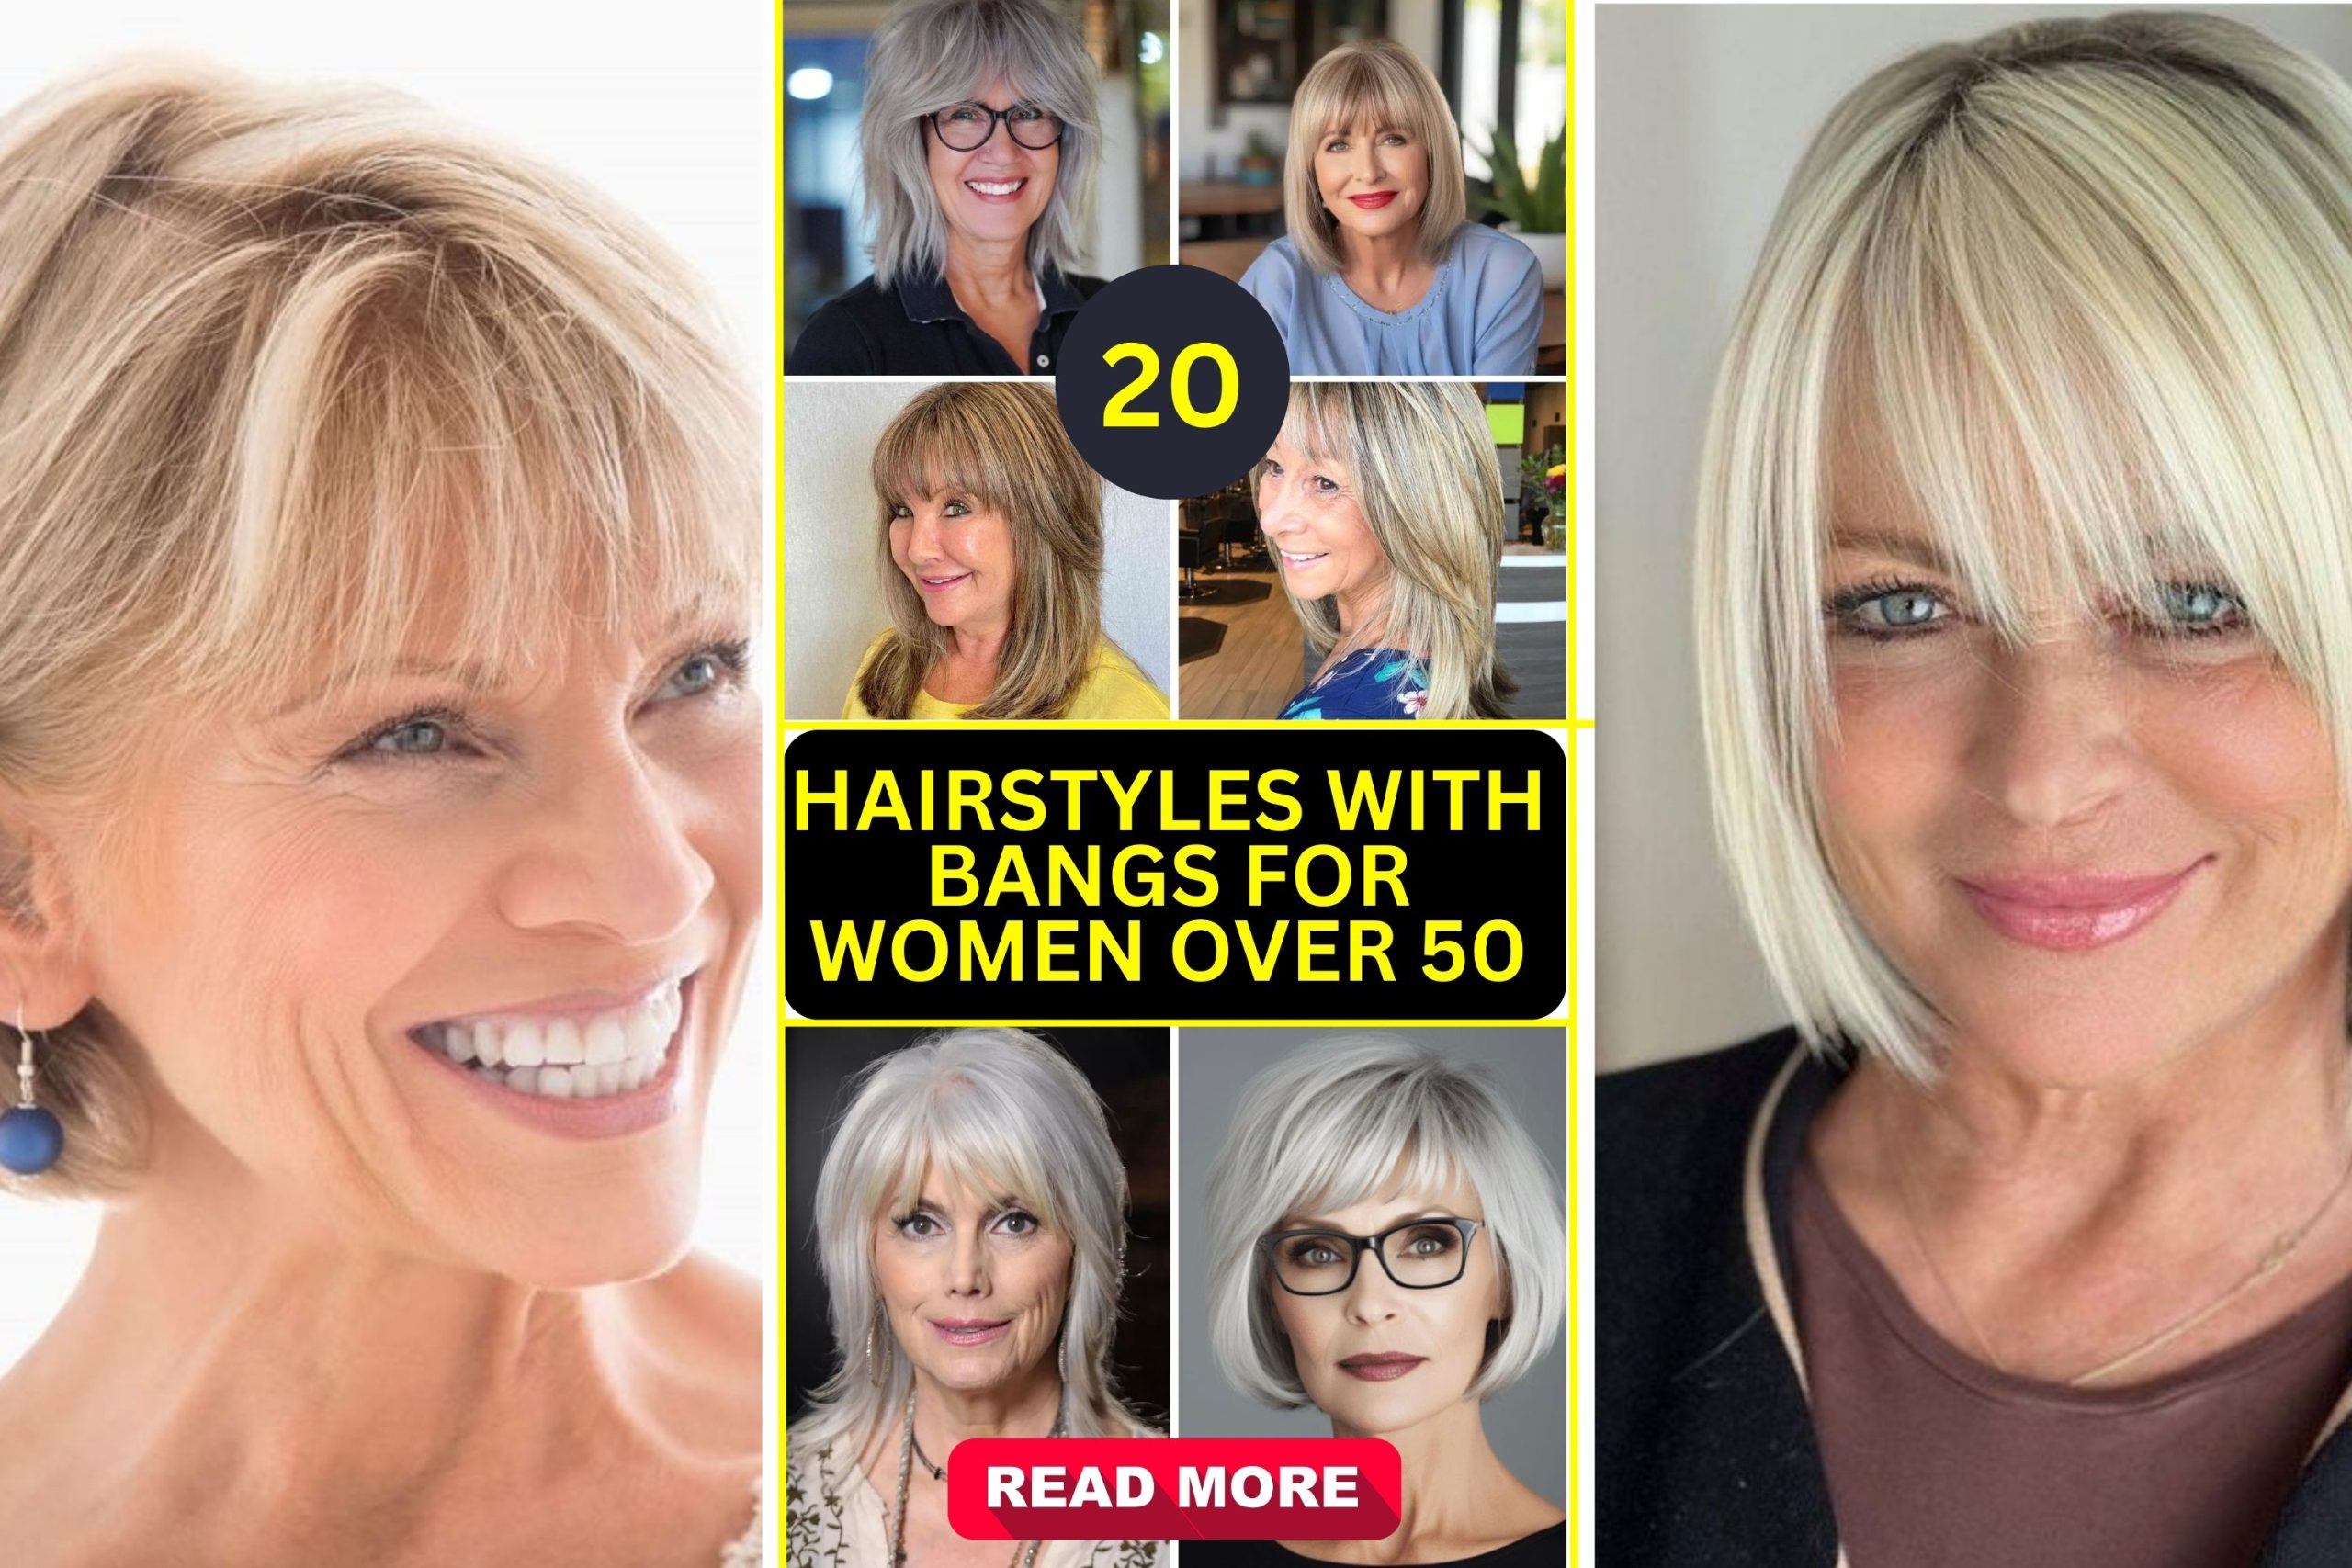 Top 20 Hairstyles with Bangs for Women Over 50: Ageless Chic - divagaze.com